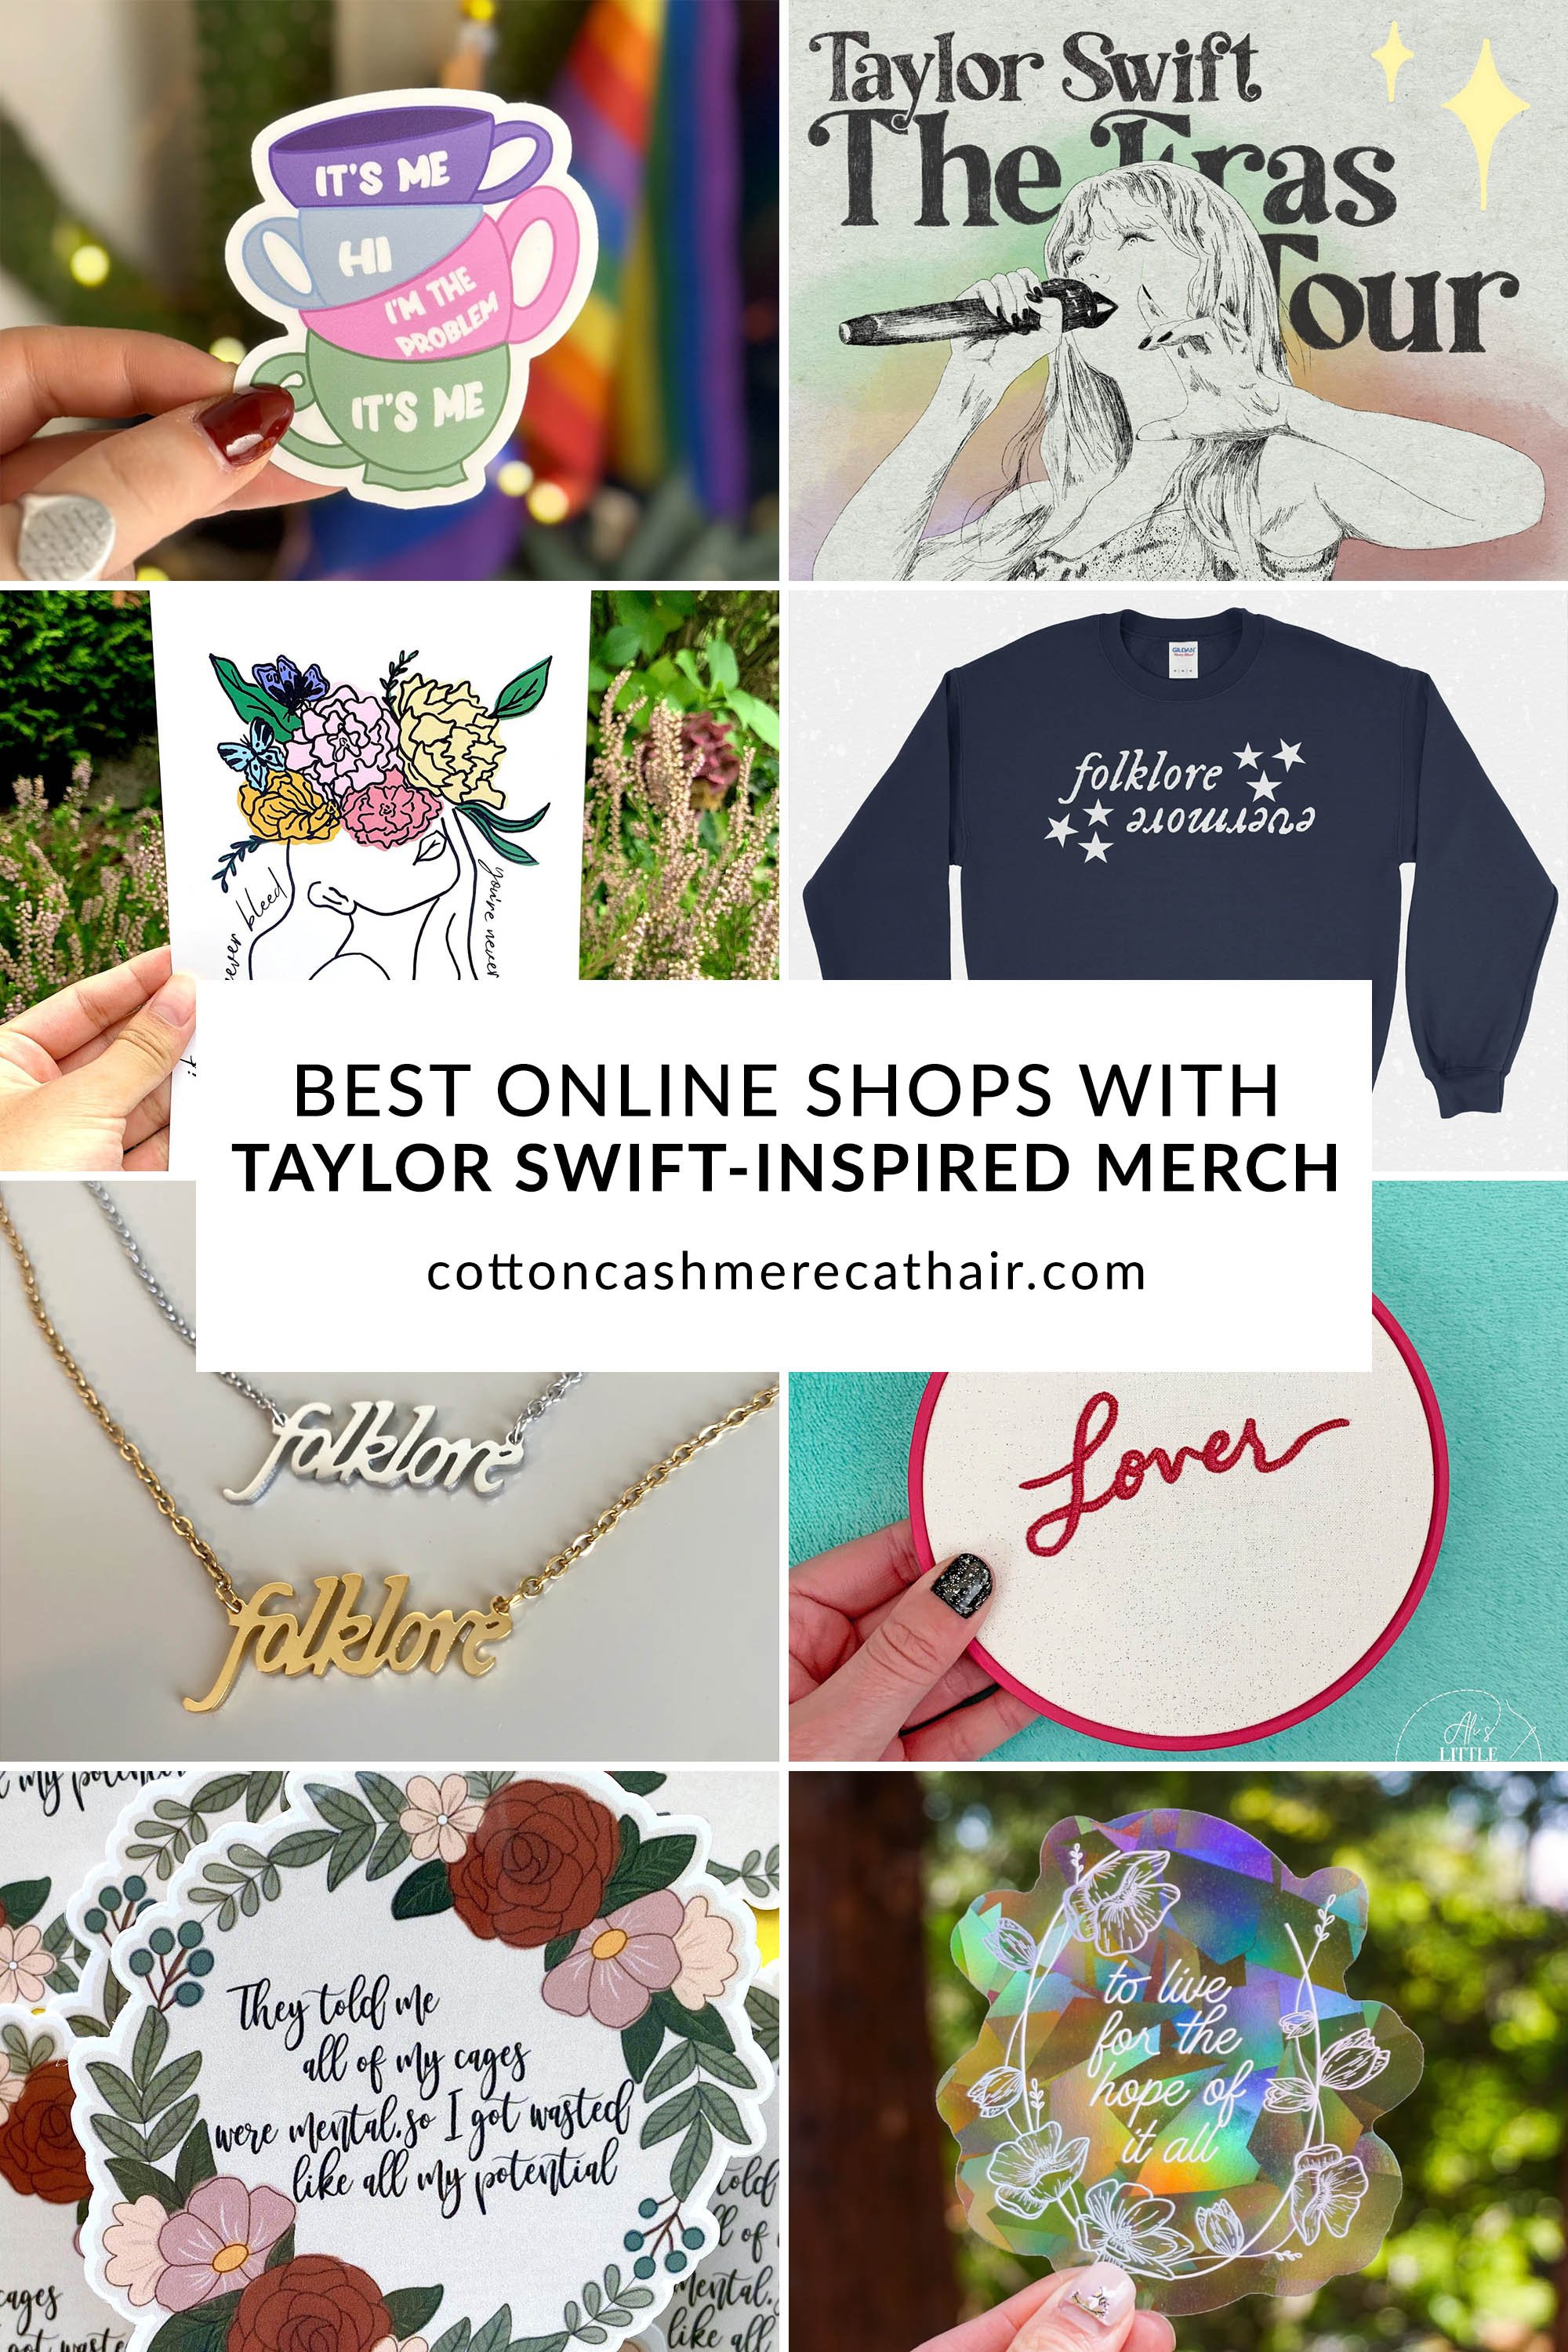 Taylor Swift And Stella McCartney Team Up For 'Lover' Merch, taylor swift  merch 